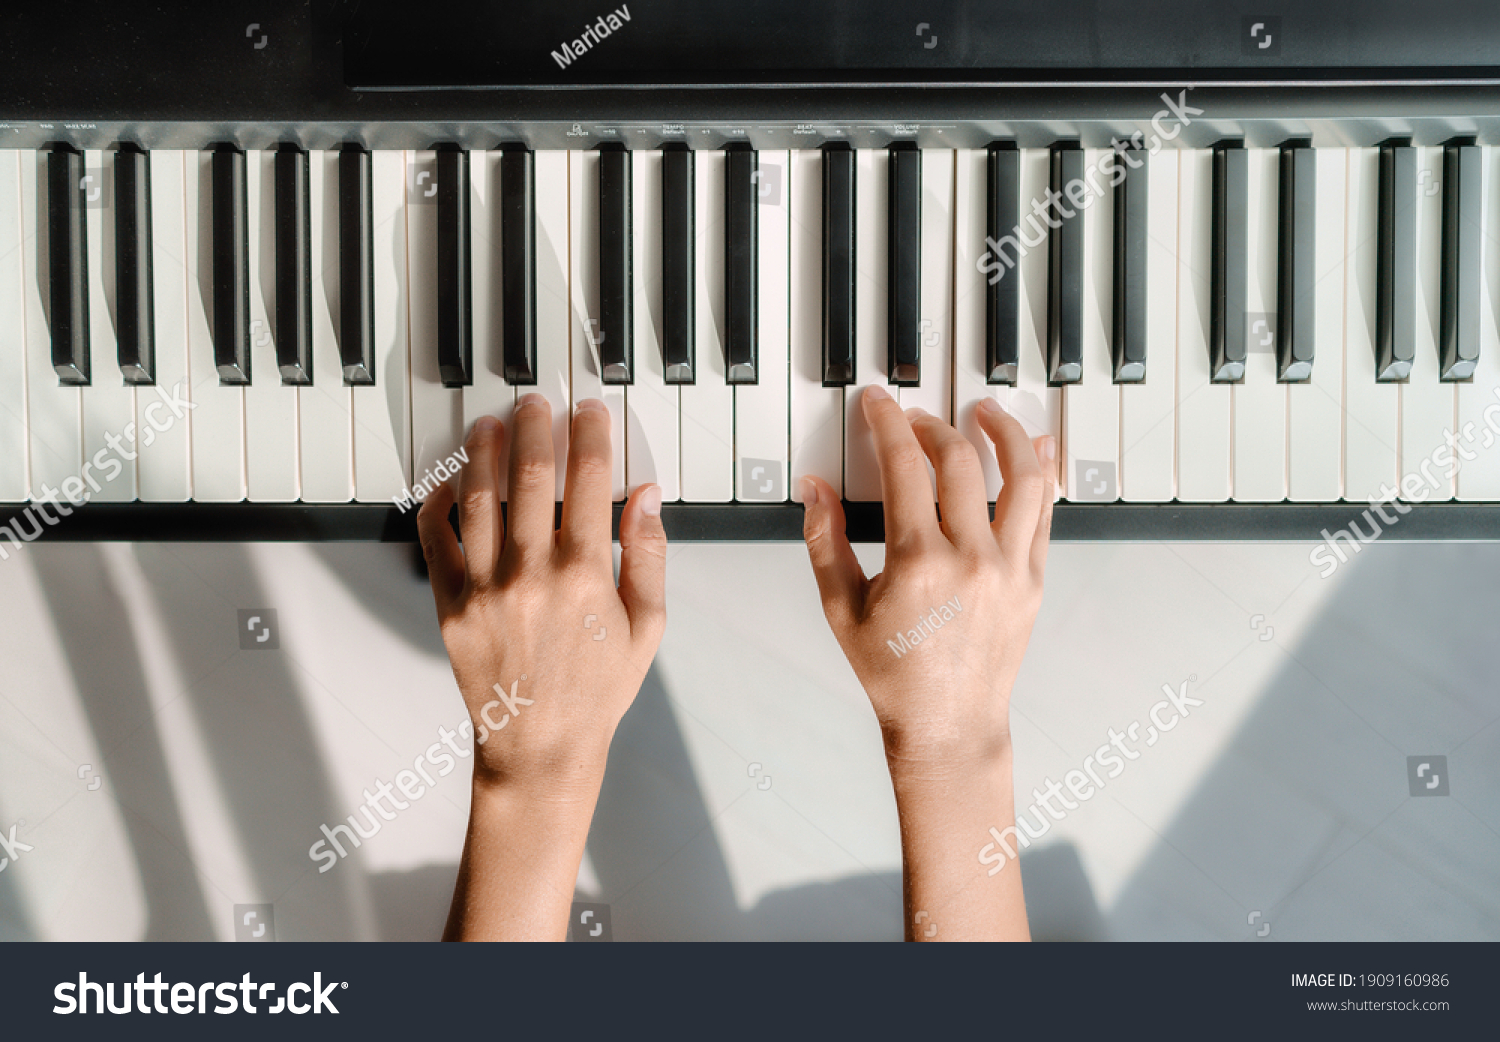 Piano learning chords at home - woman playing digital keyboard with online music lesson. Top view of musician hands on keys. #1909160986